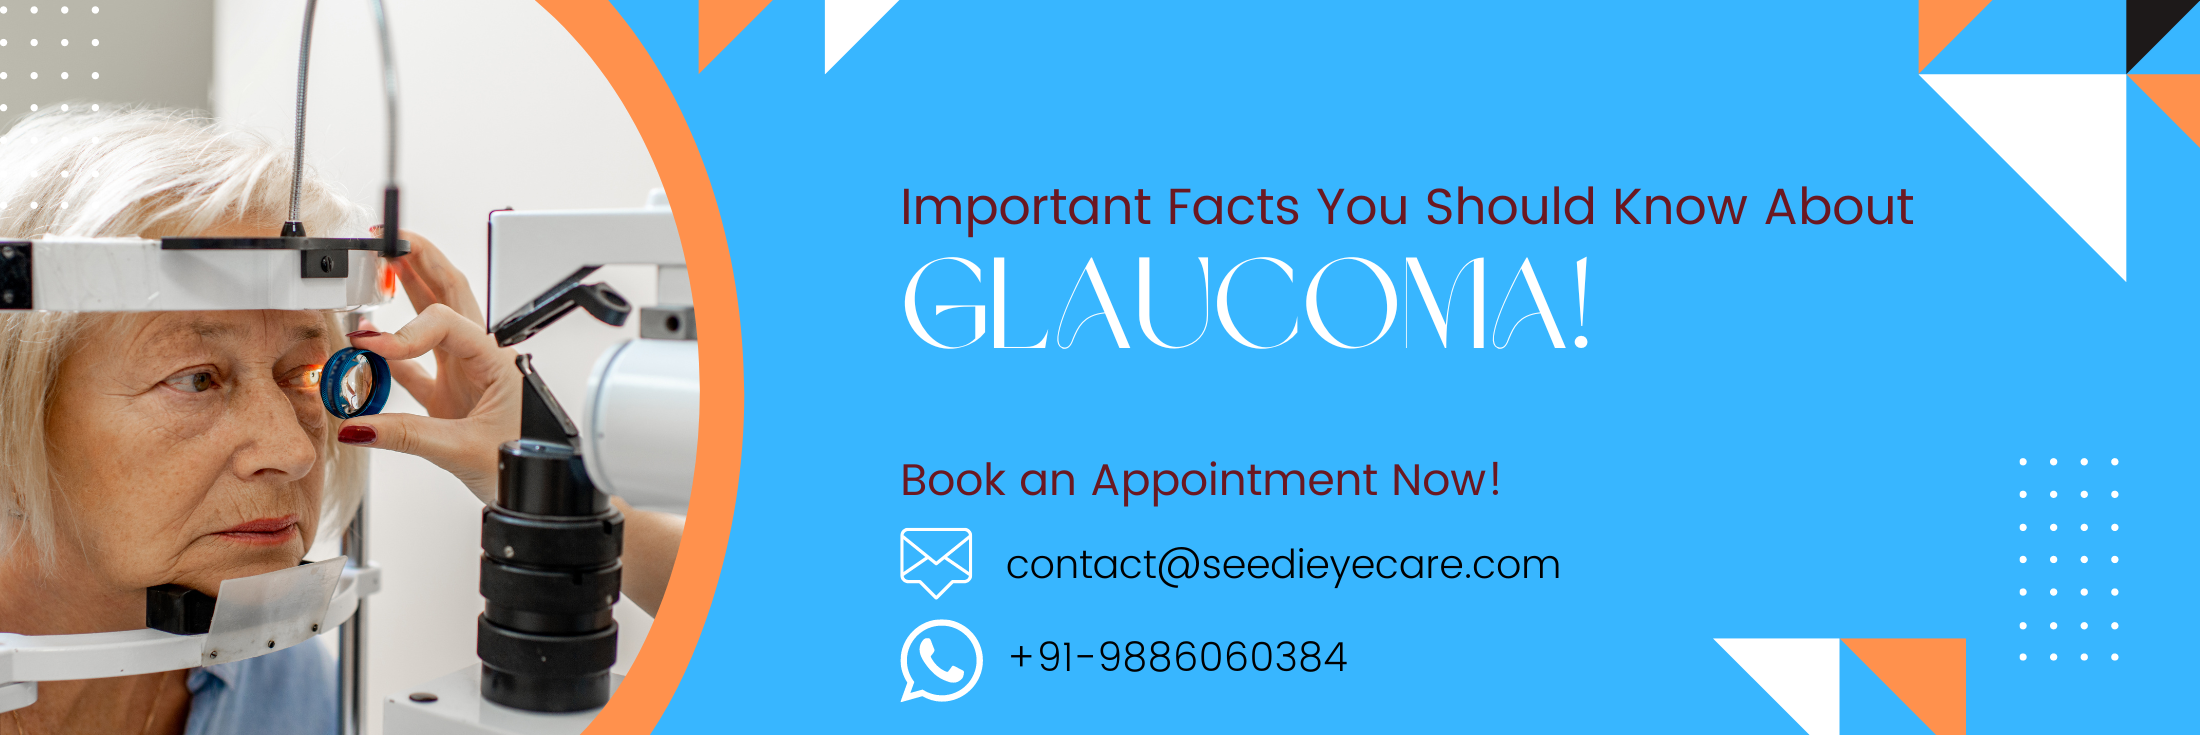 importants-facts-you-should-know -about-glaucoma